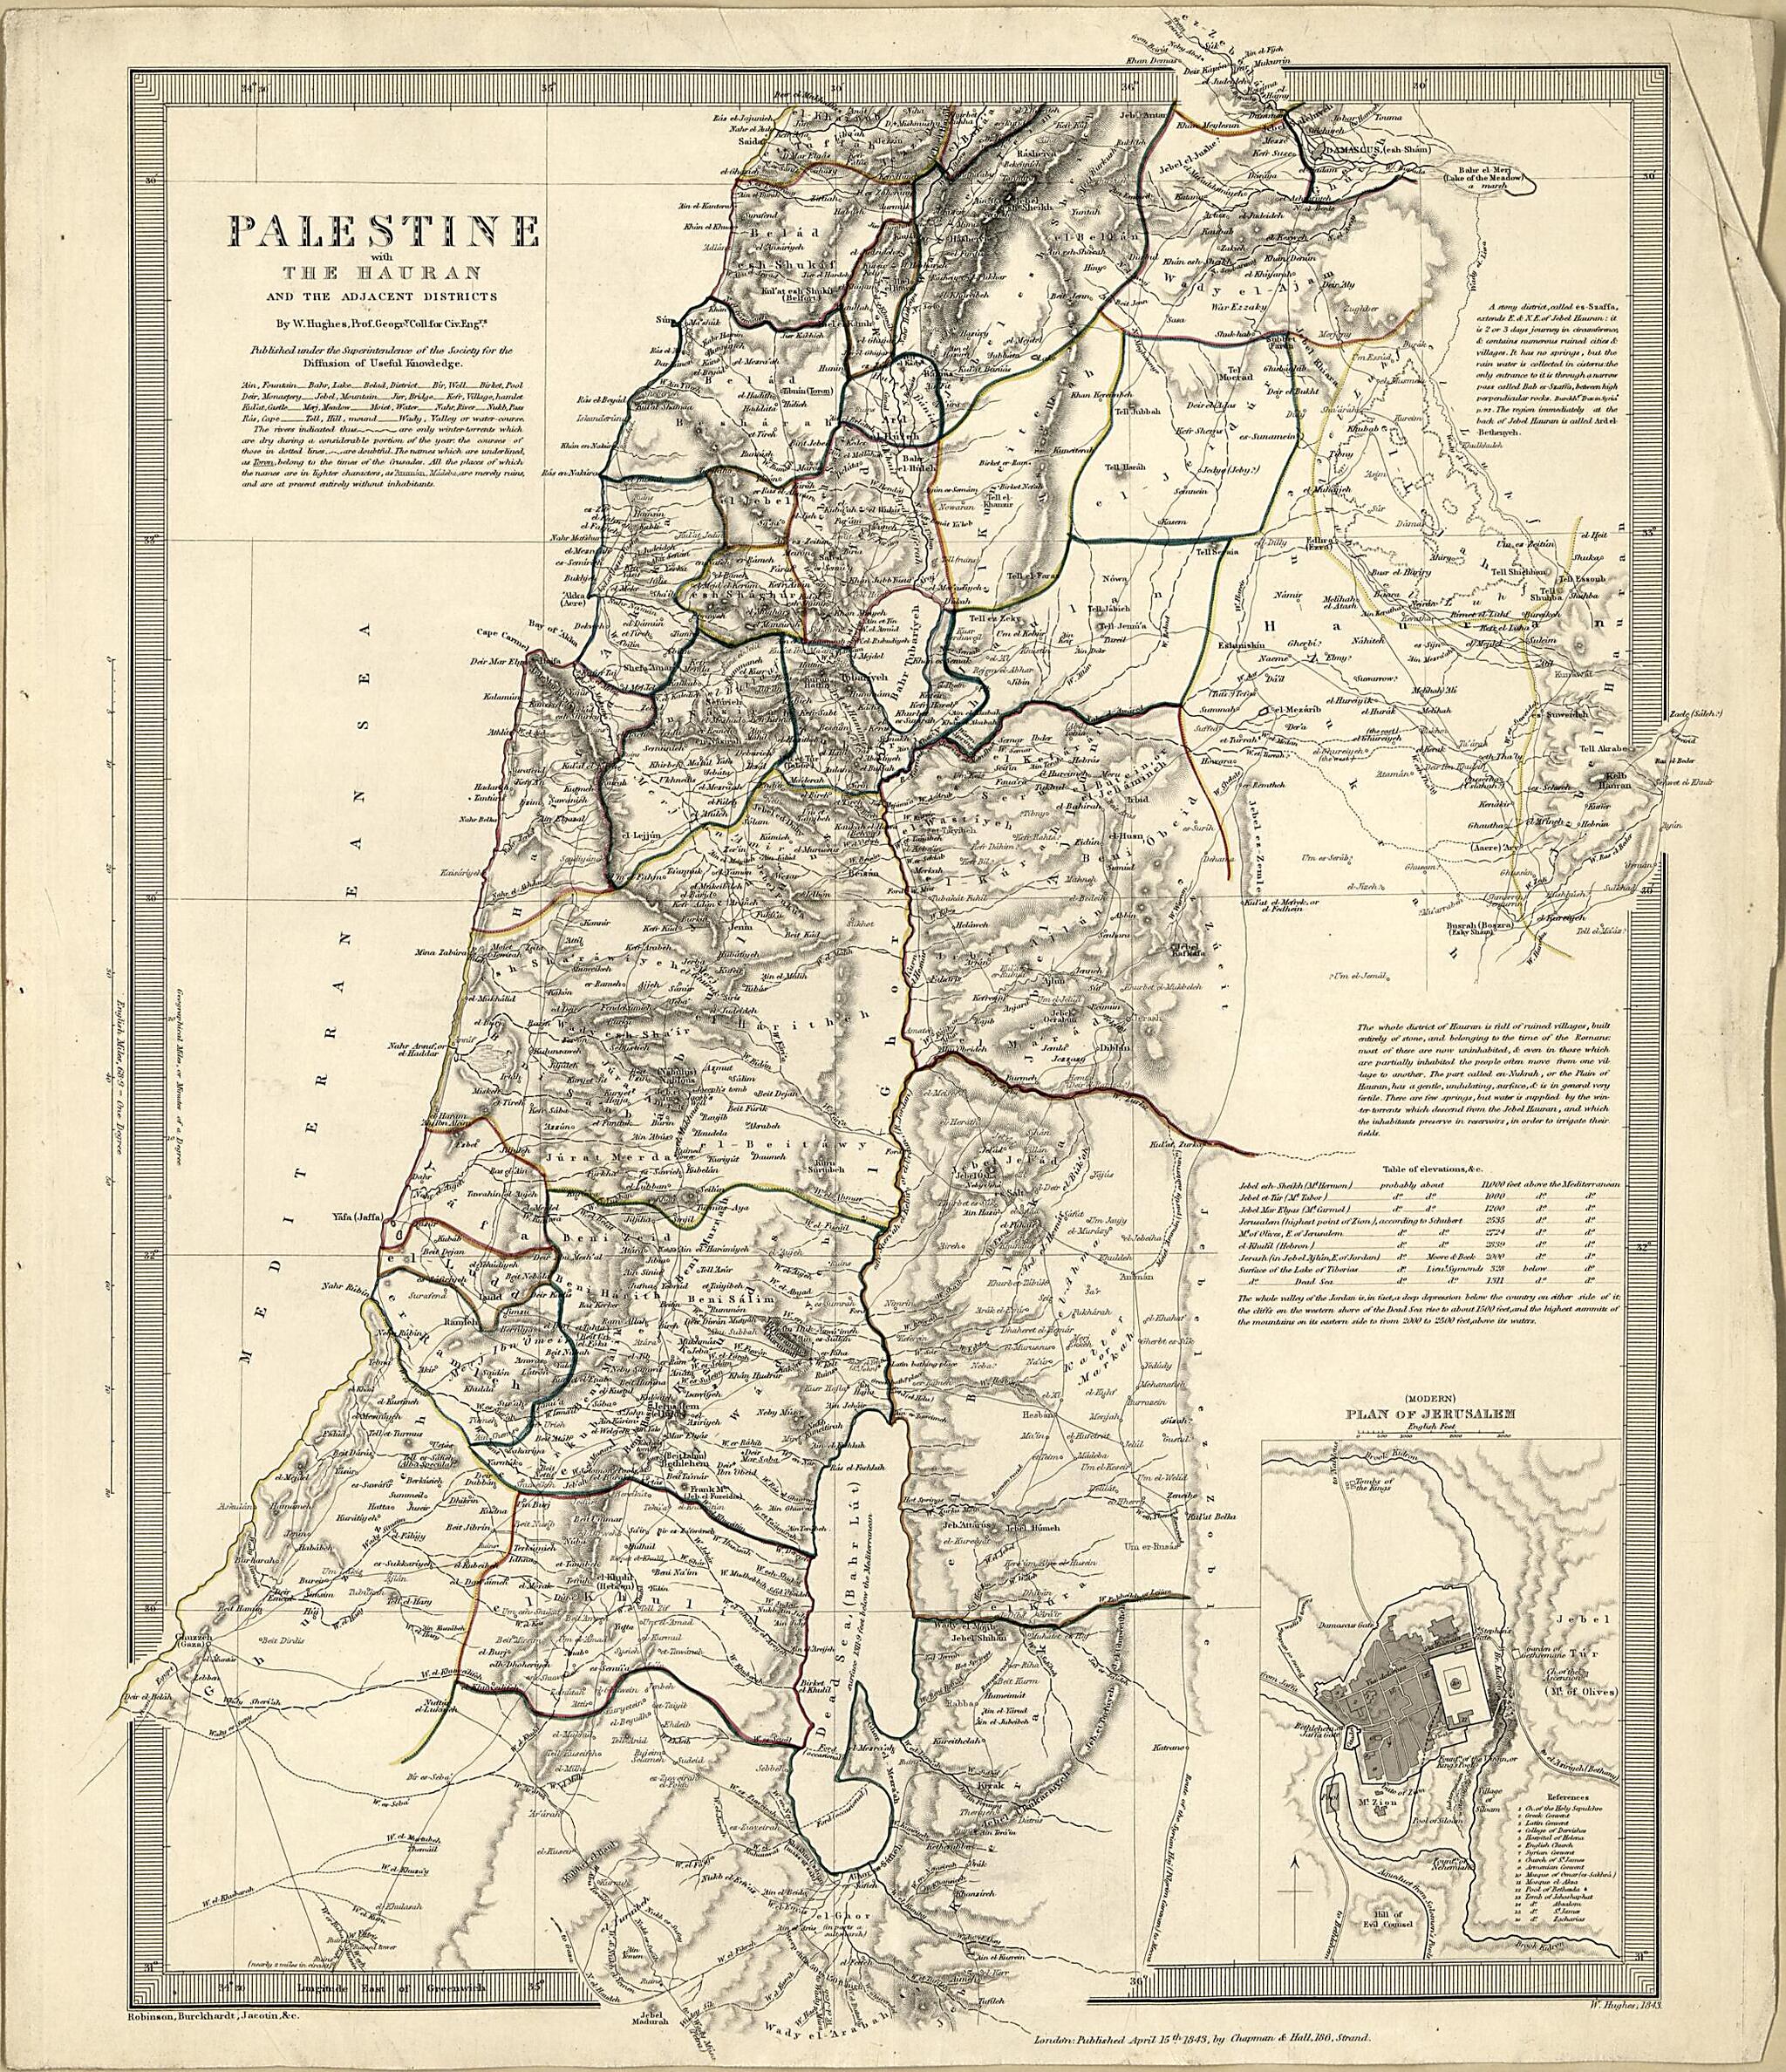 This old map of Palestine, With the Hauran, and the Adjacent Districts from 1843 was created by John Lewis Burckhardt,  Charles Knight &amp; Co, William Hughes, Pierre Jacotin, Edward Robinson,  Society for the Diffusion of Useful Knowledge (Great Britain) i